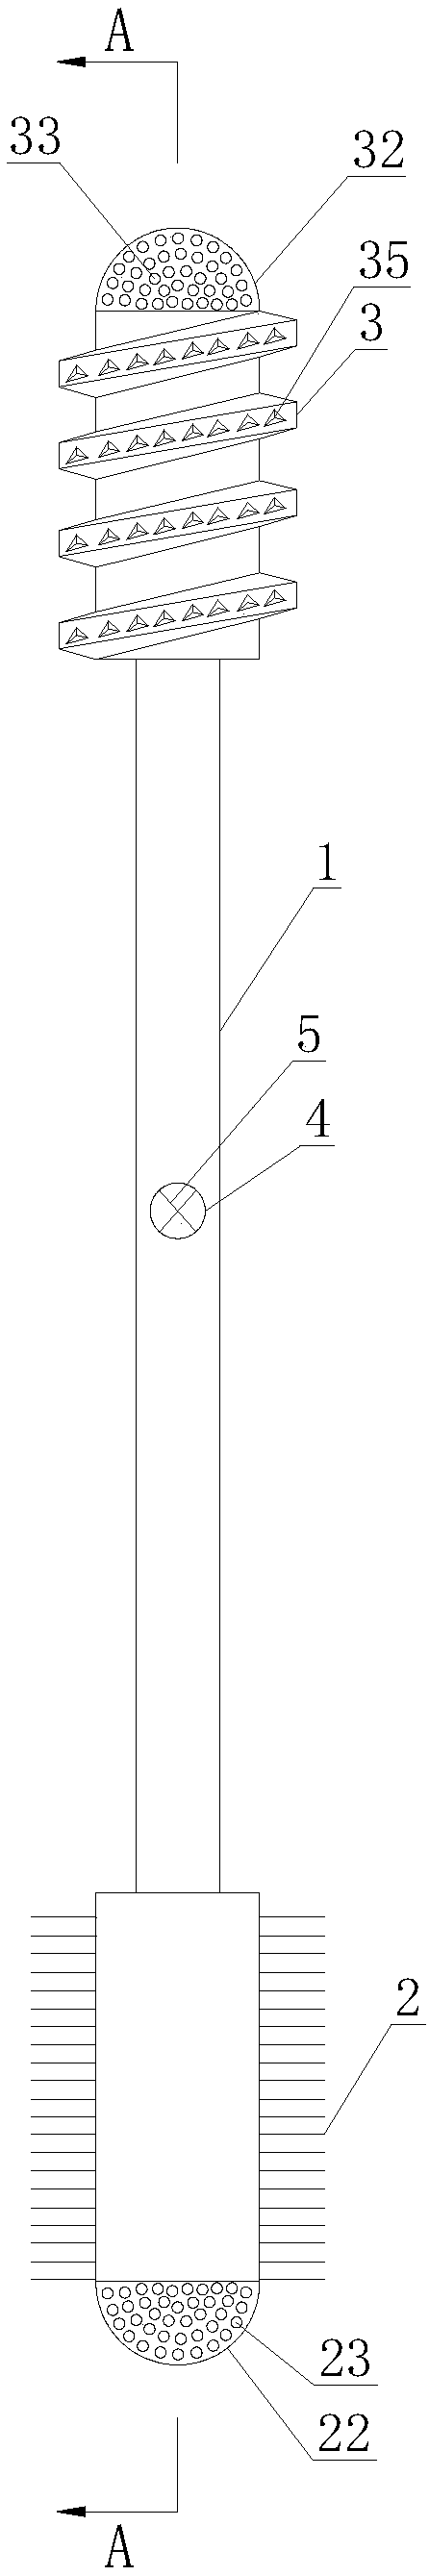 Anal fistula wall tissue scraping and cleaning device